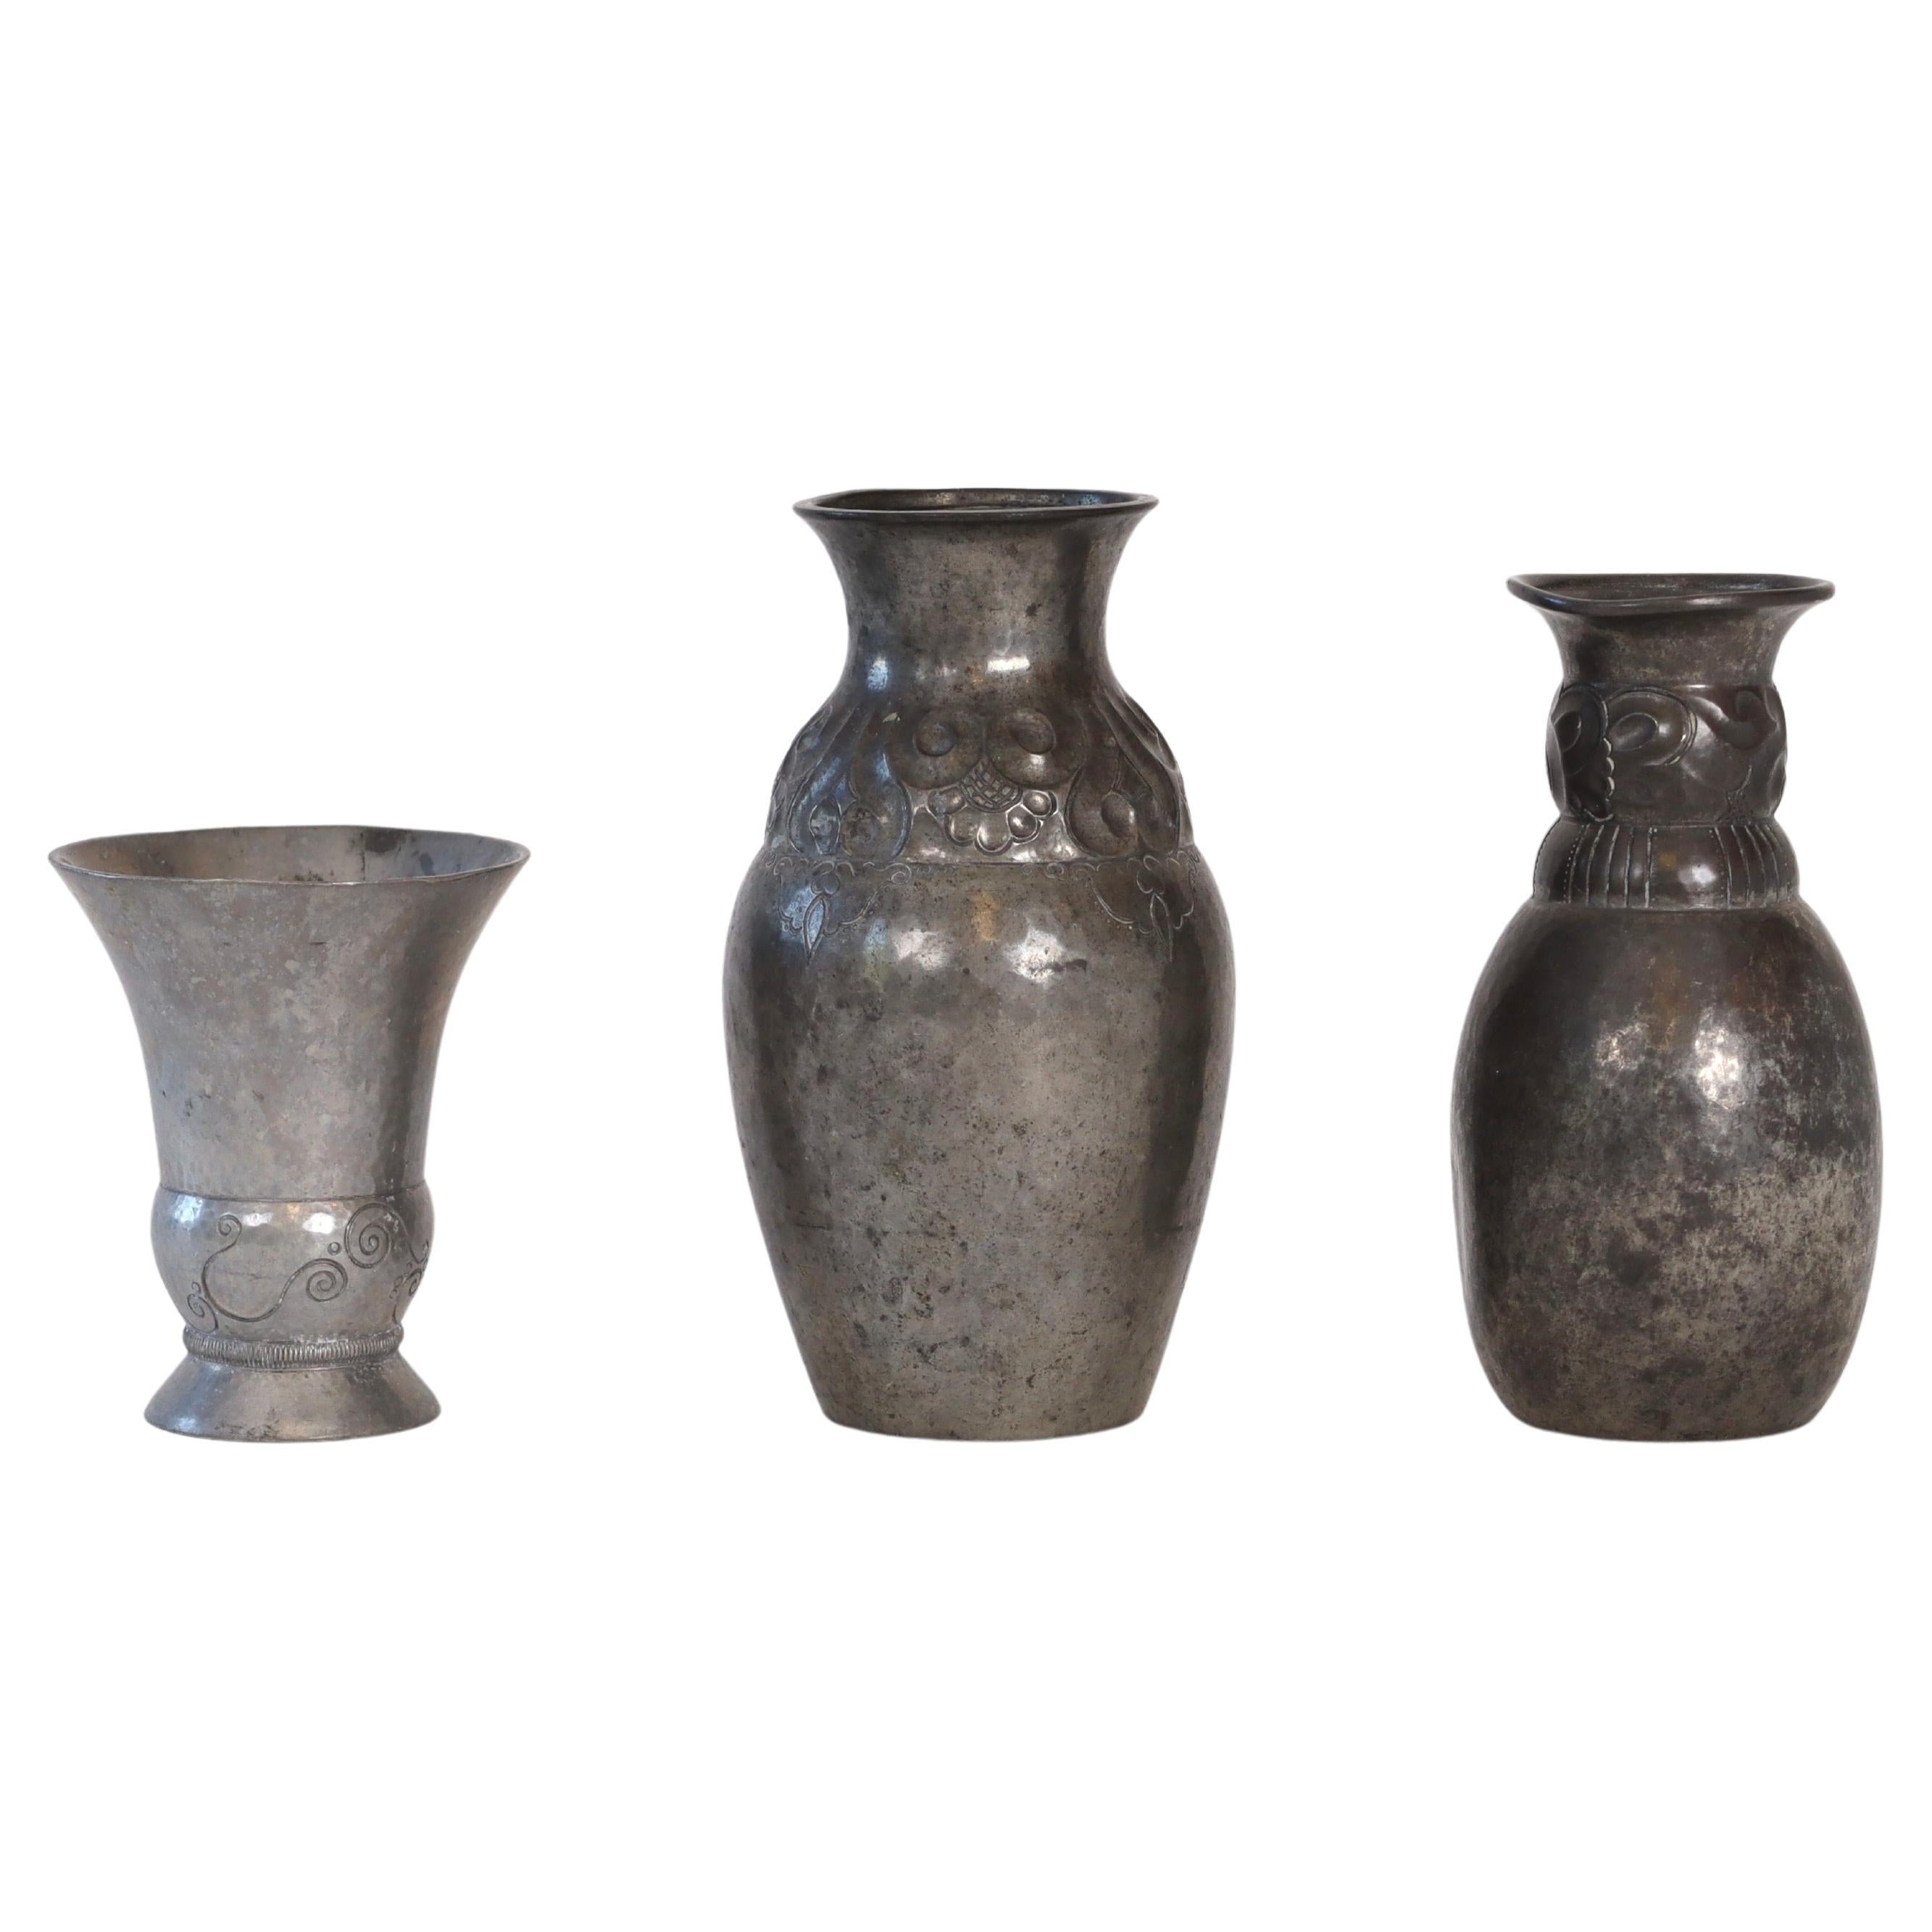 Trio of Early Pewter vases by Just Andersen, 1920s, Denmark